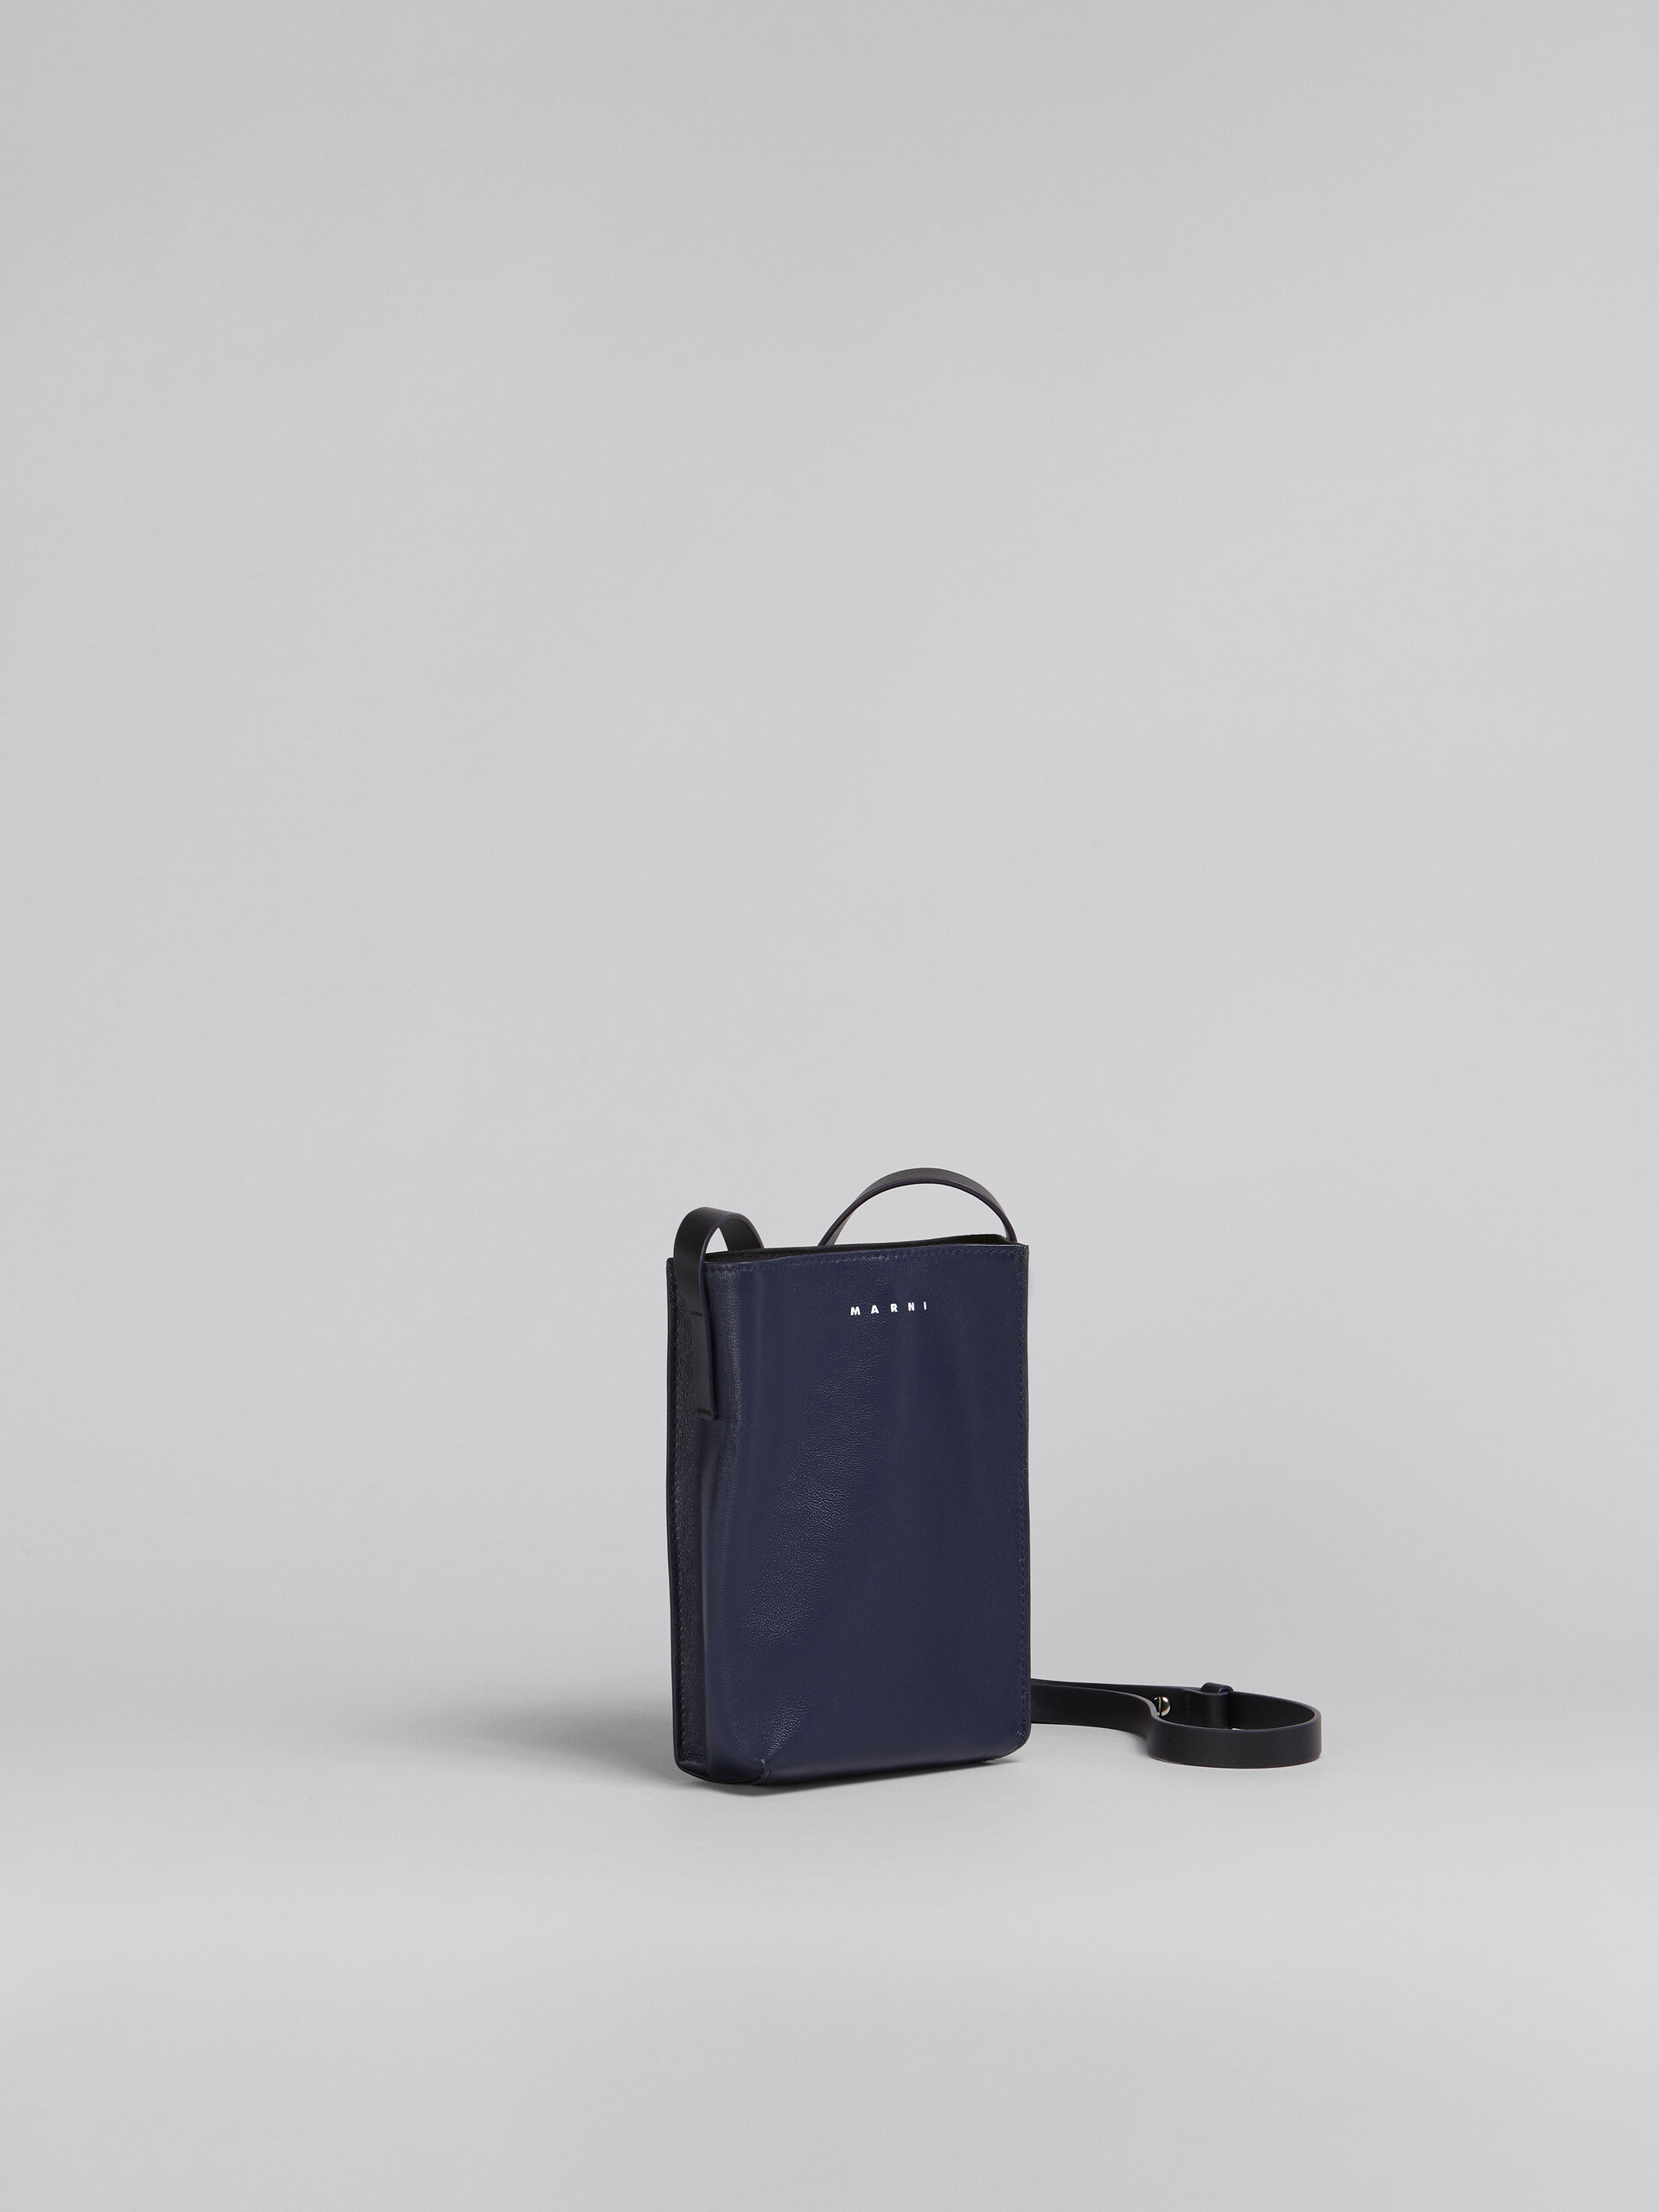 MUSEO SOFT small bag in blue and black shiny leather - Shoulder Bag - Image 6